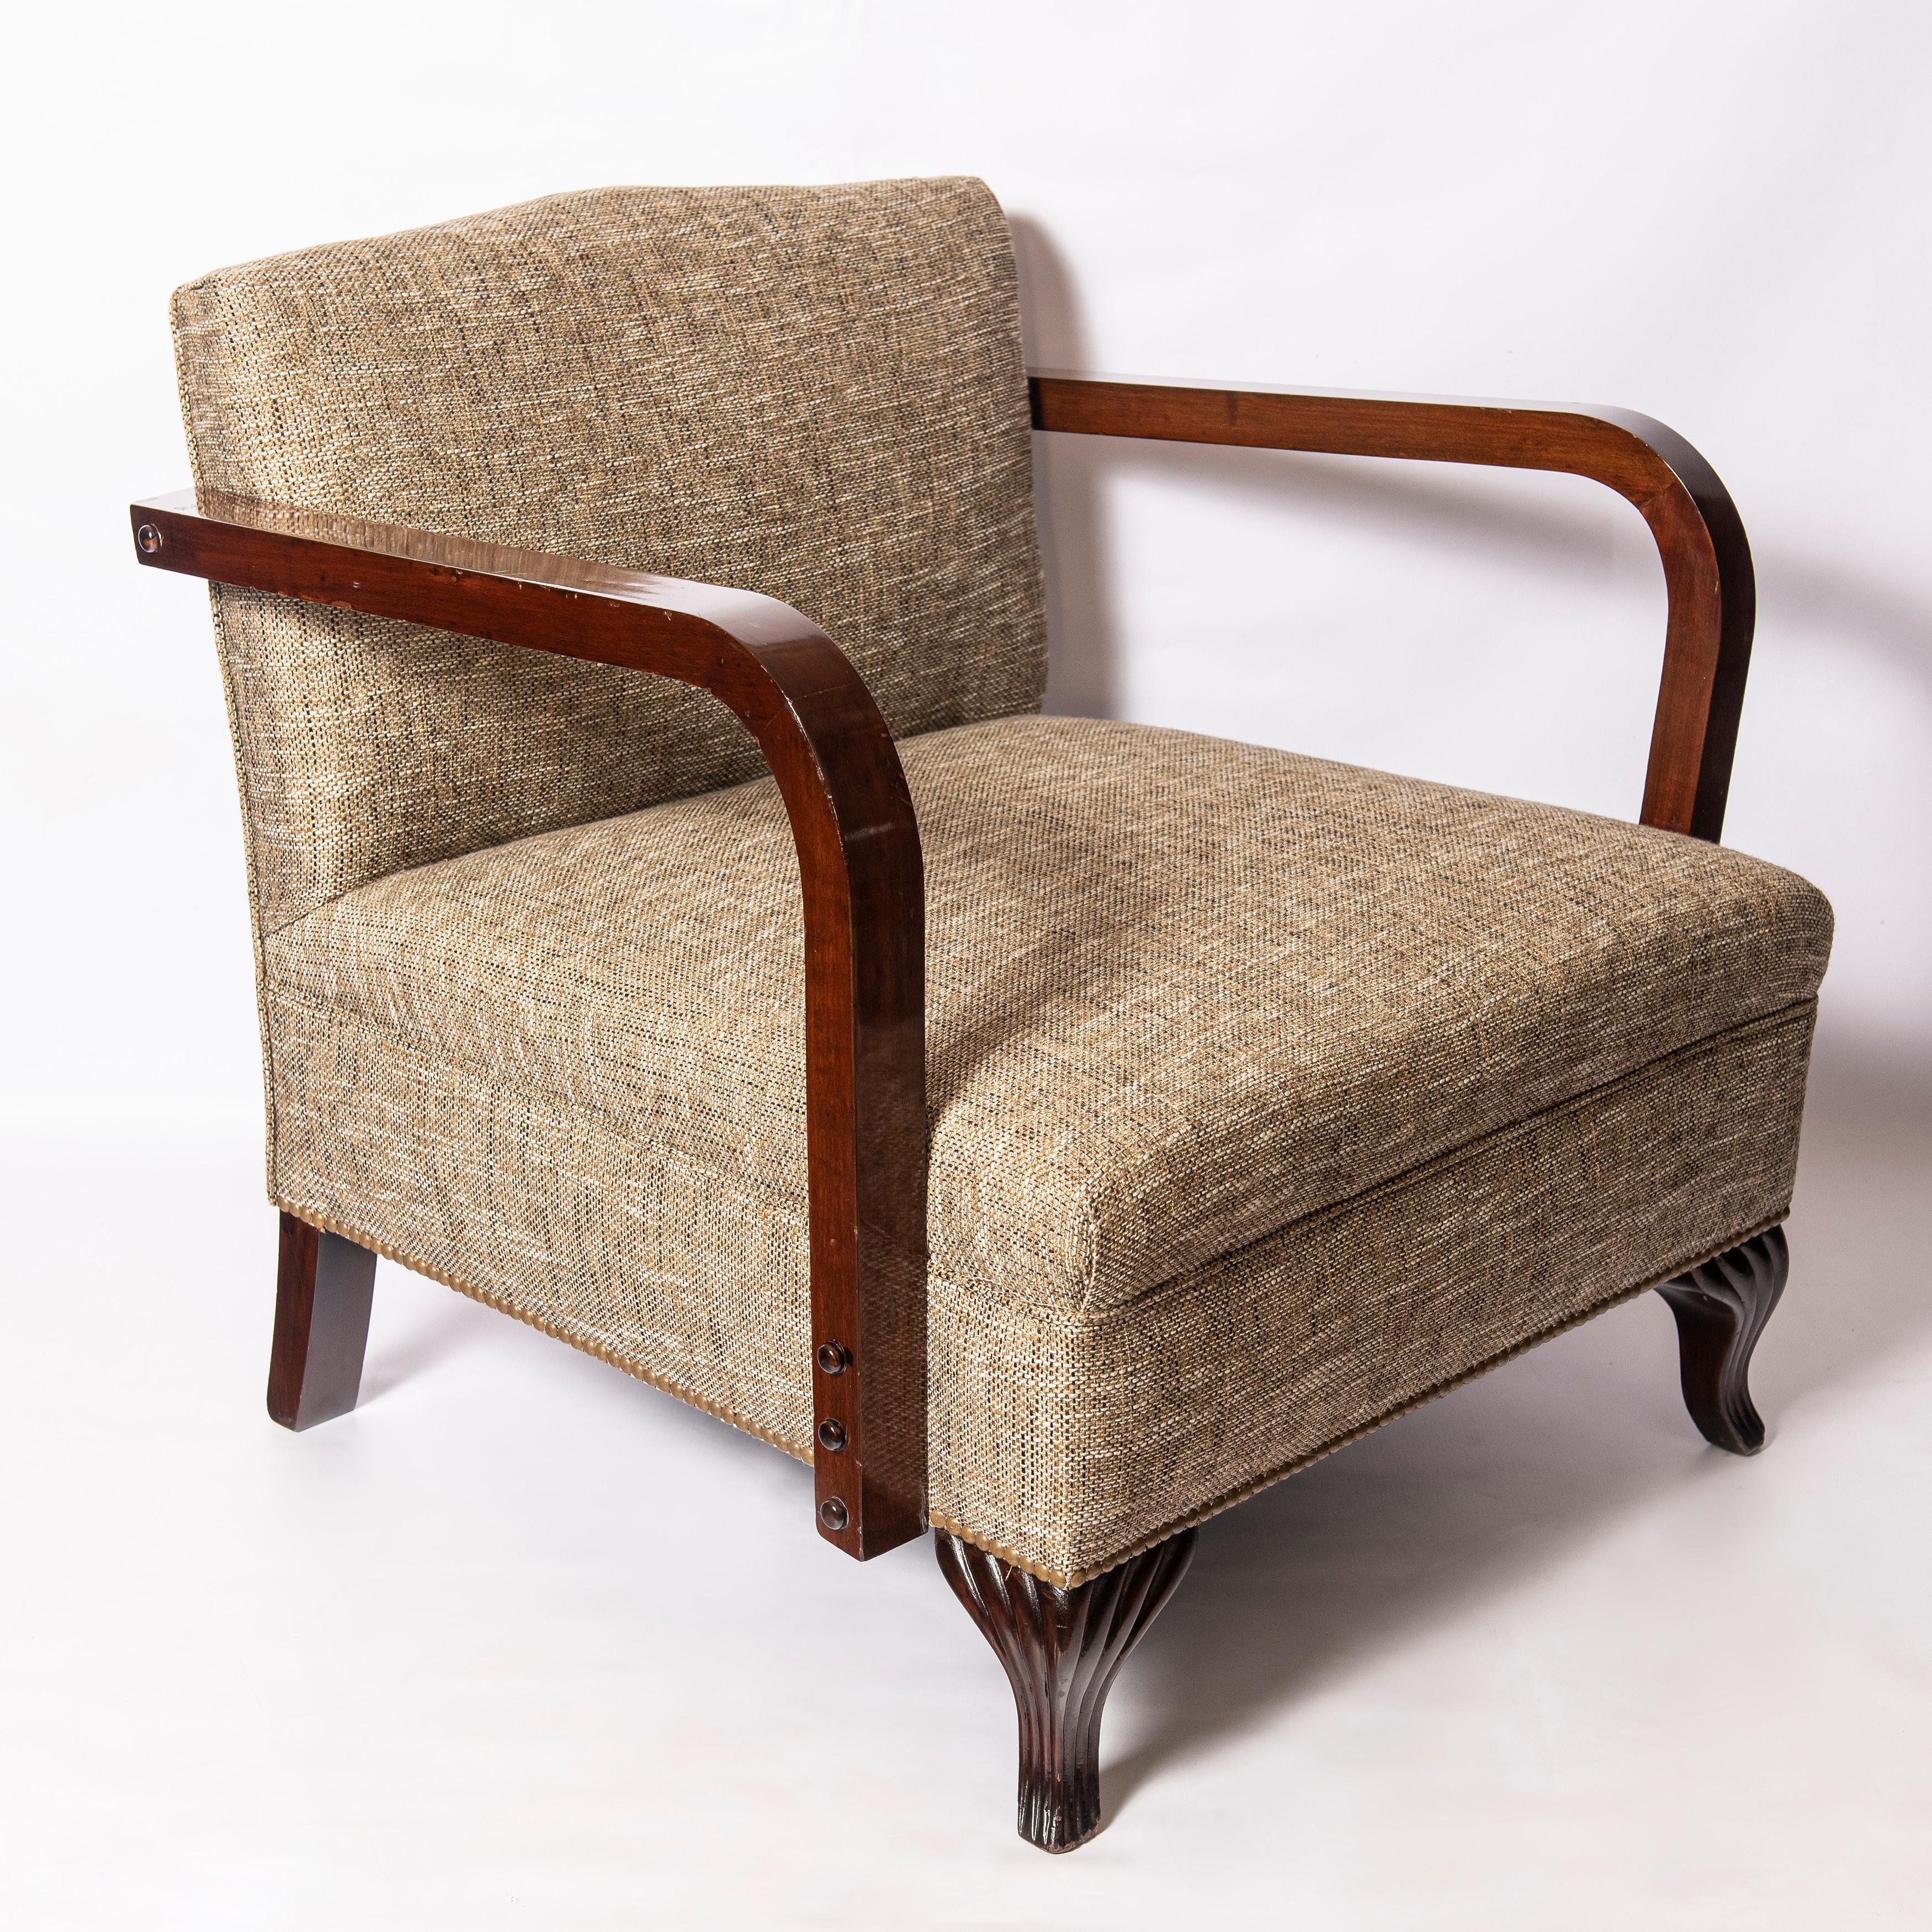 French Pair of Wood and Fabric Armchairs, Art Deco Period, France, circa 1940 For Sale